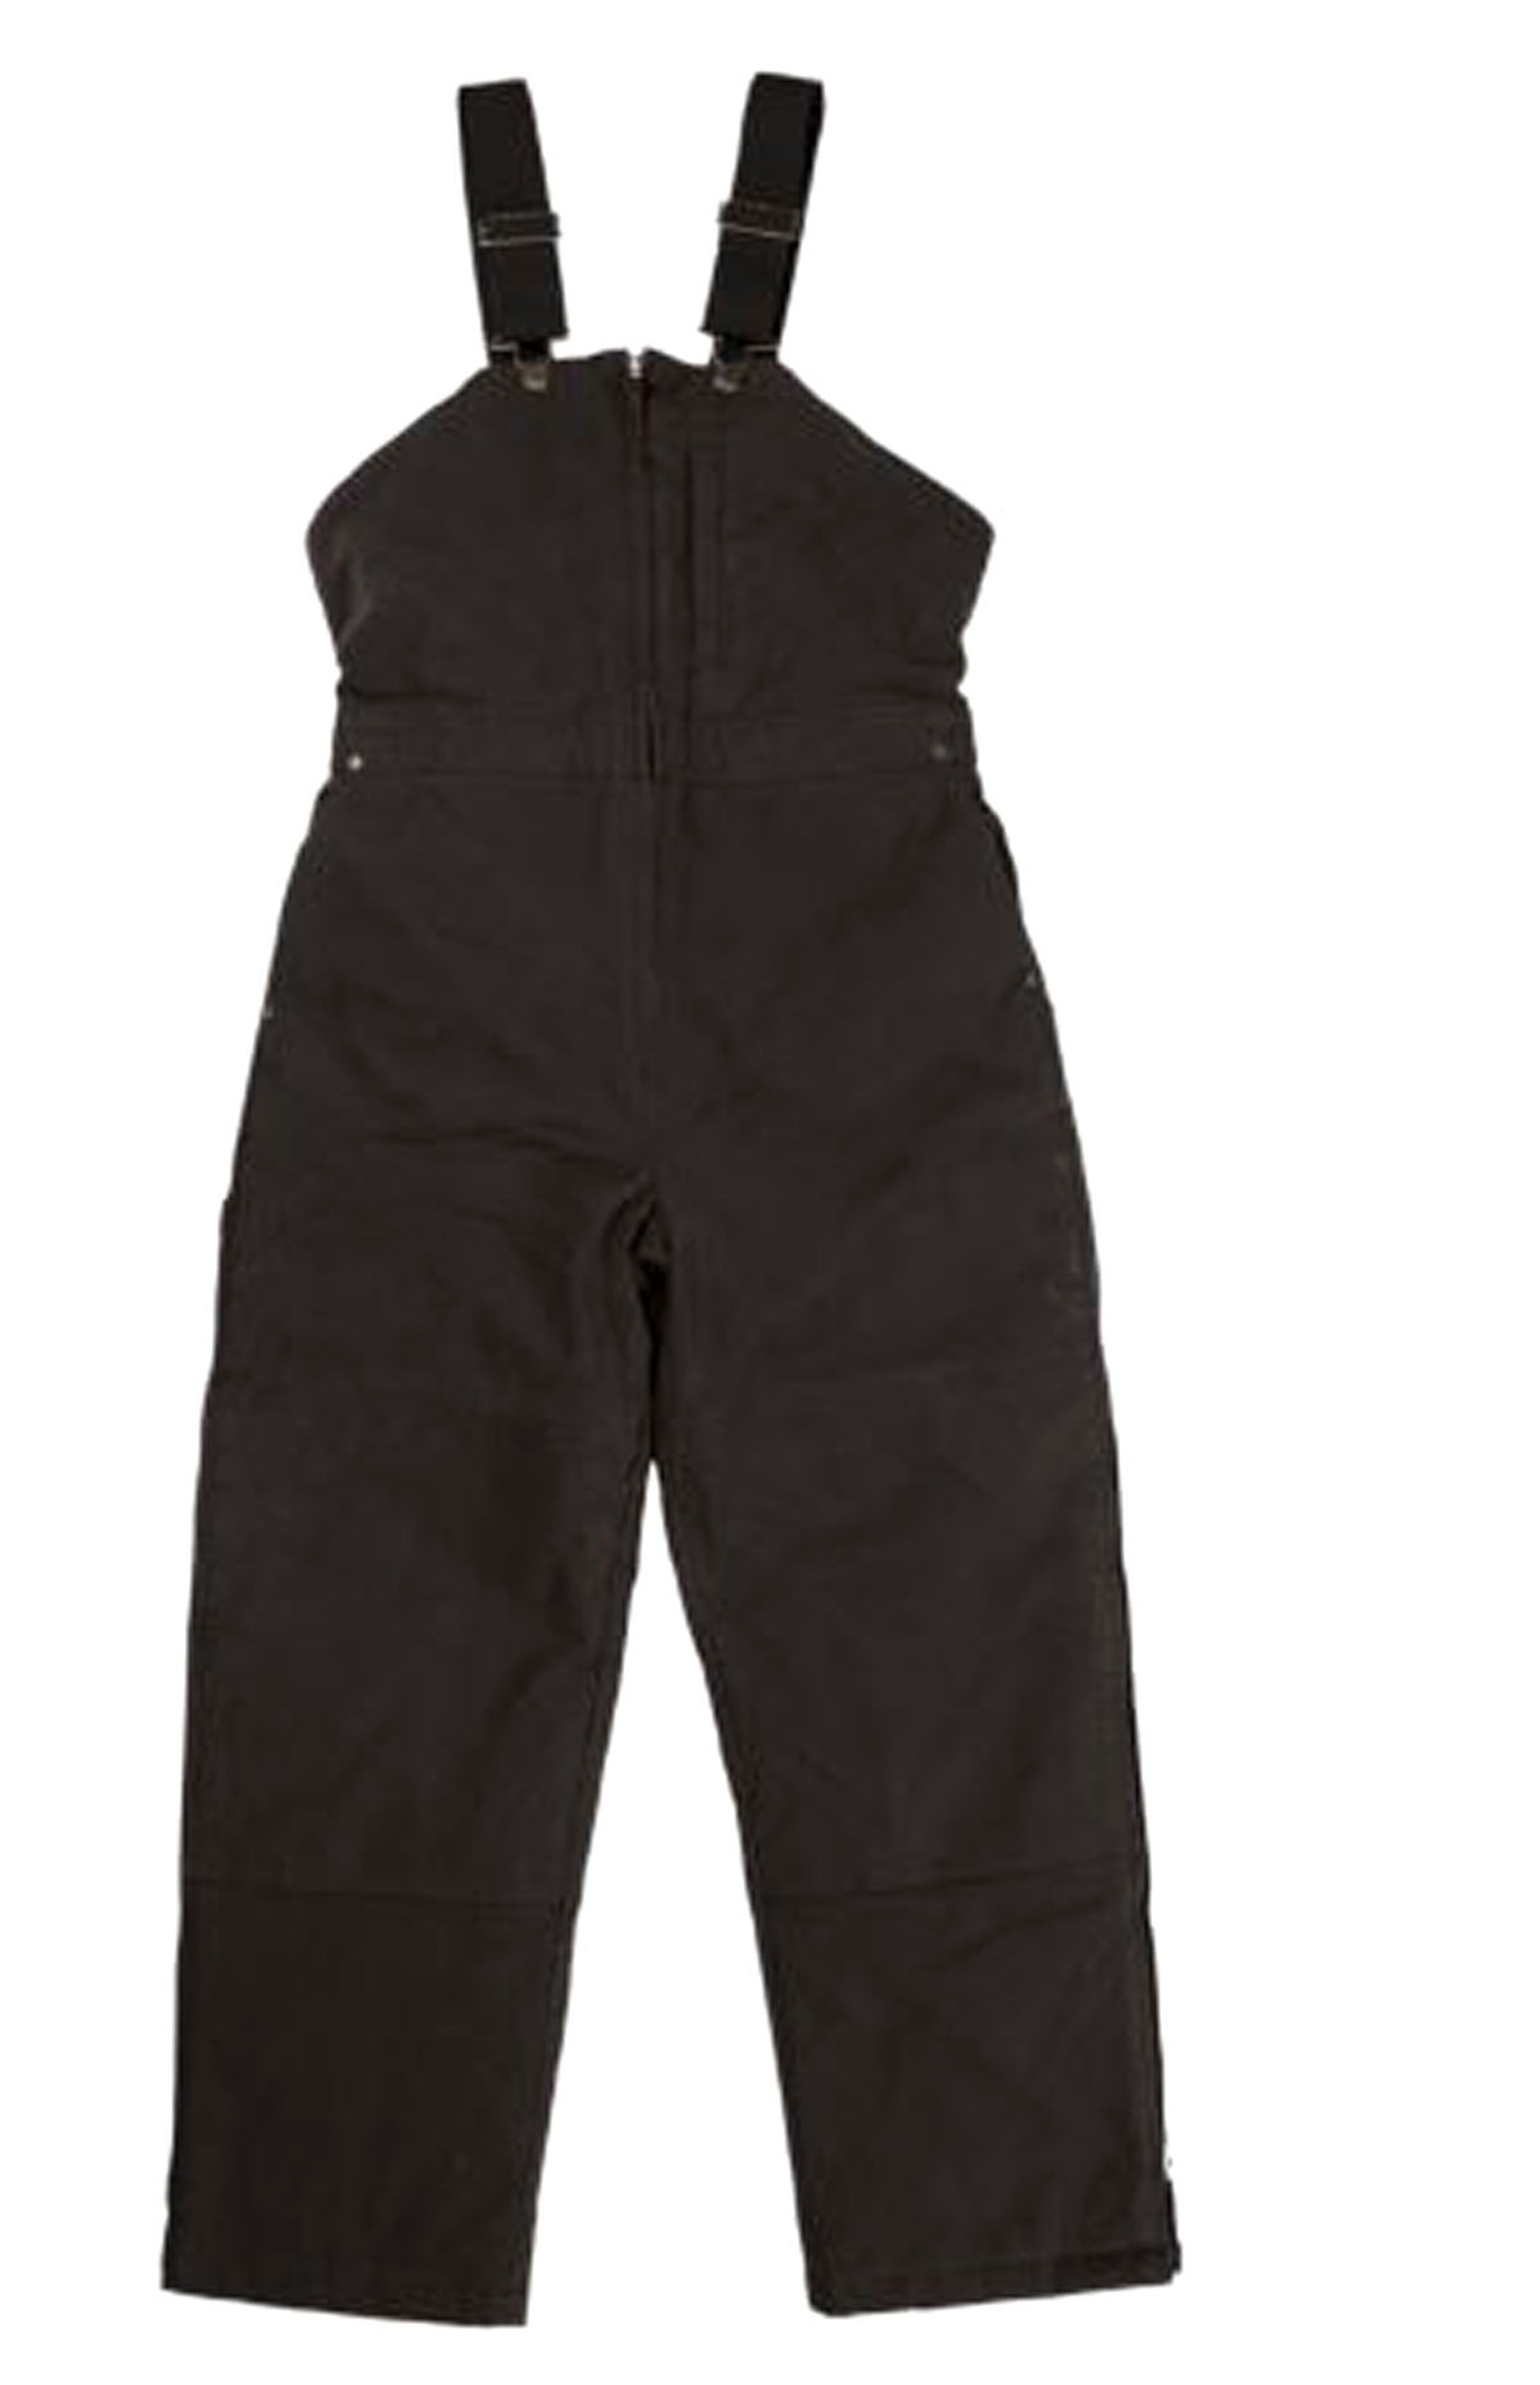 Women’s Insulated Duck Overall (Black)